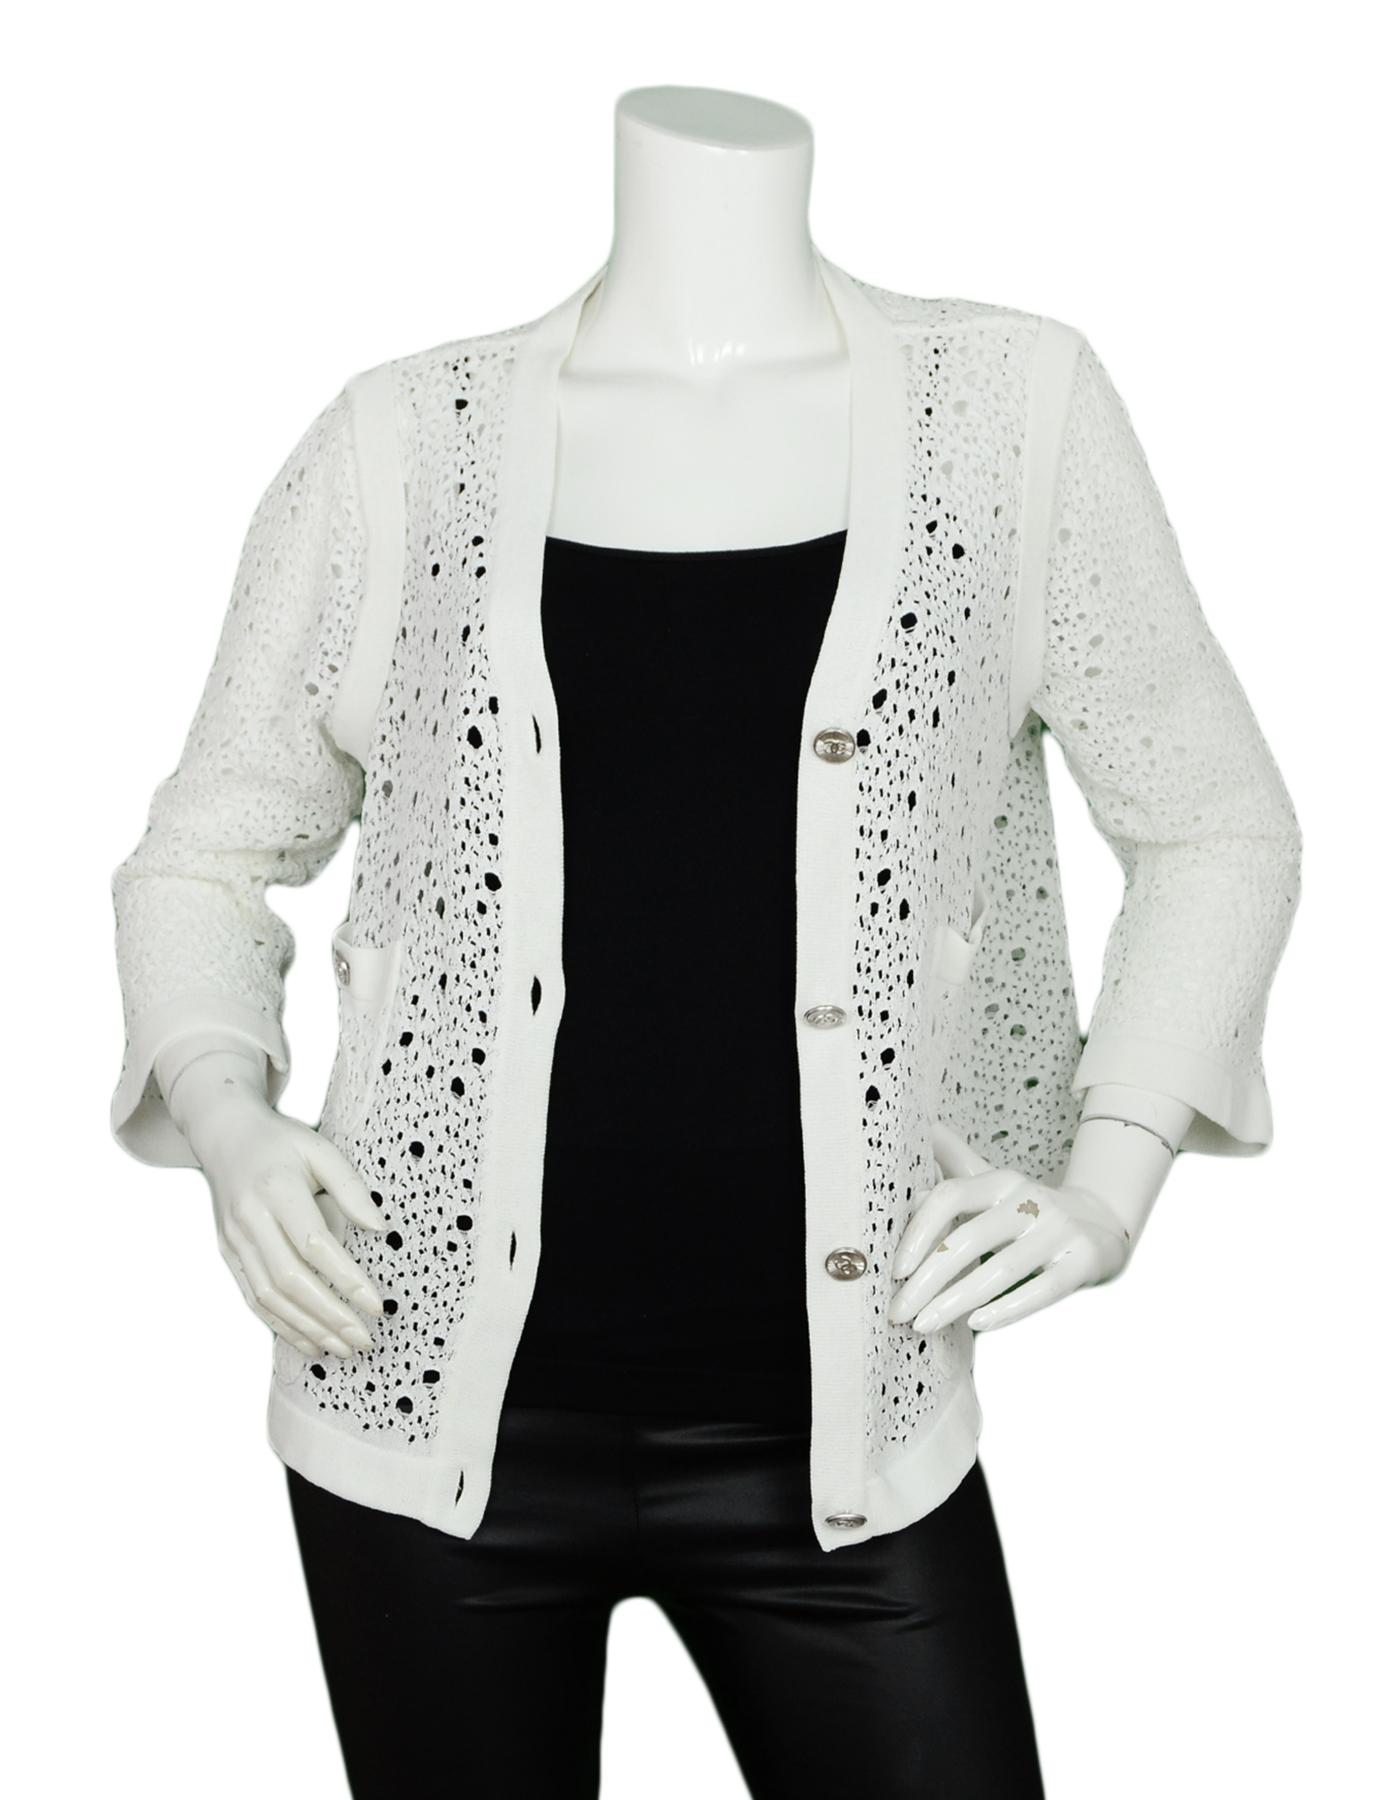 Chanel White Crochet Button down Jacket w/ 4 Pockets & 8 Silvertone Buttons sz Large

Color: White
Opening/Closure: Front Buttons
Overall Condition: Excellent pre-owned condition, MISSING tag & material information

Tag Size: Large *Please refer to